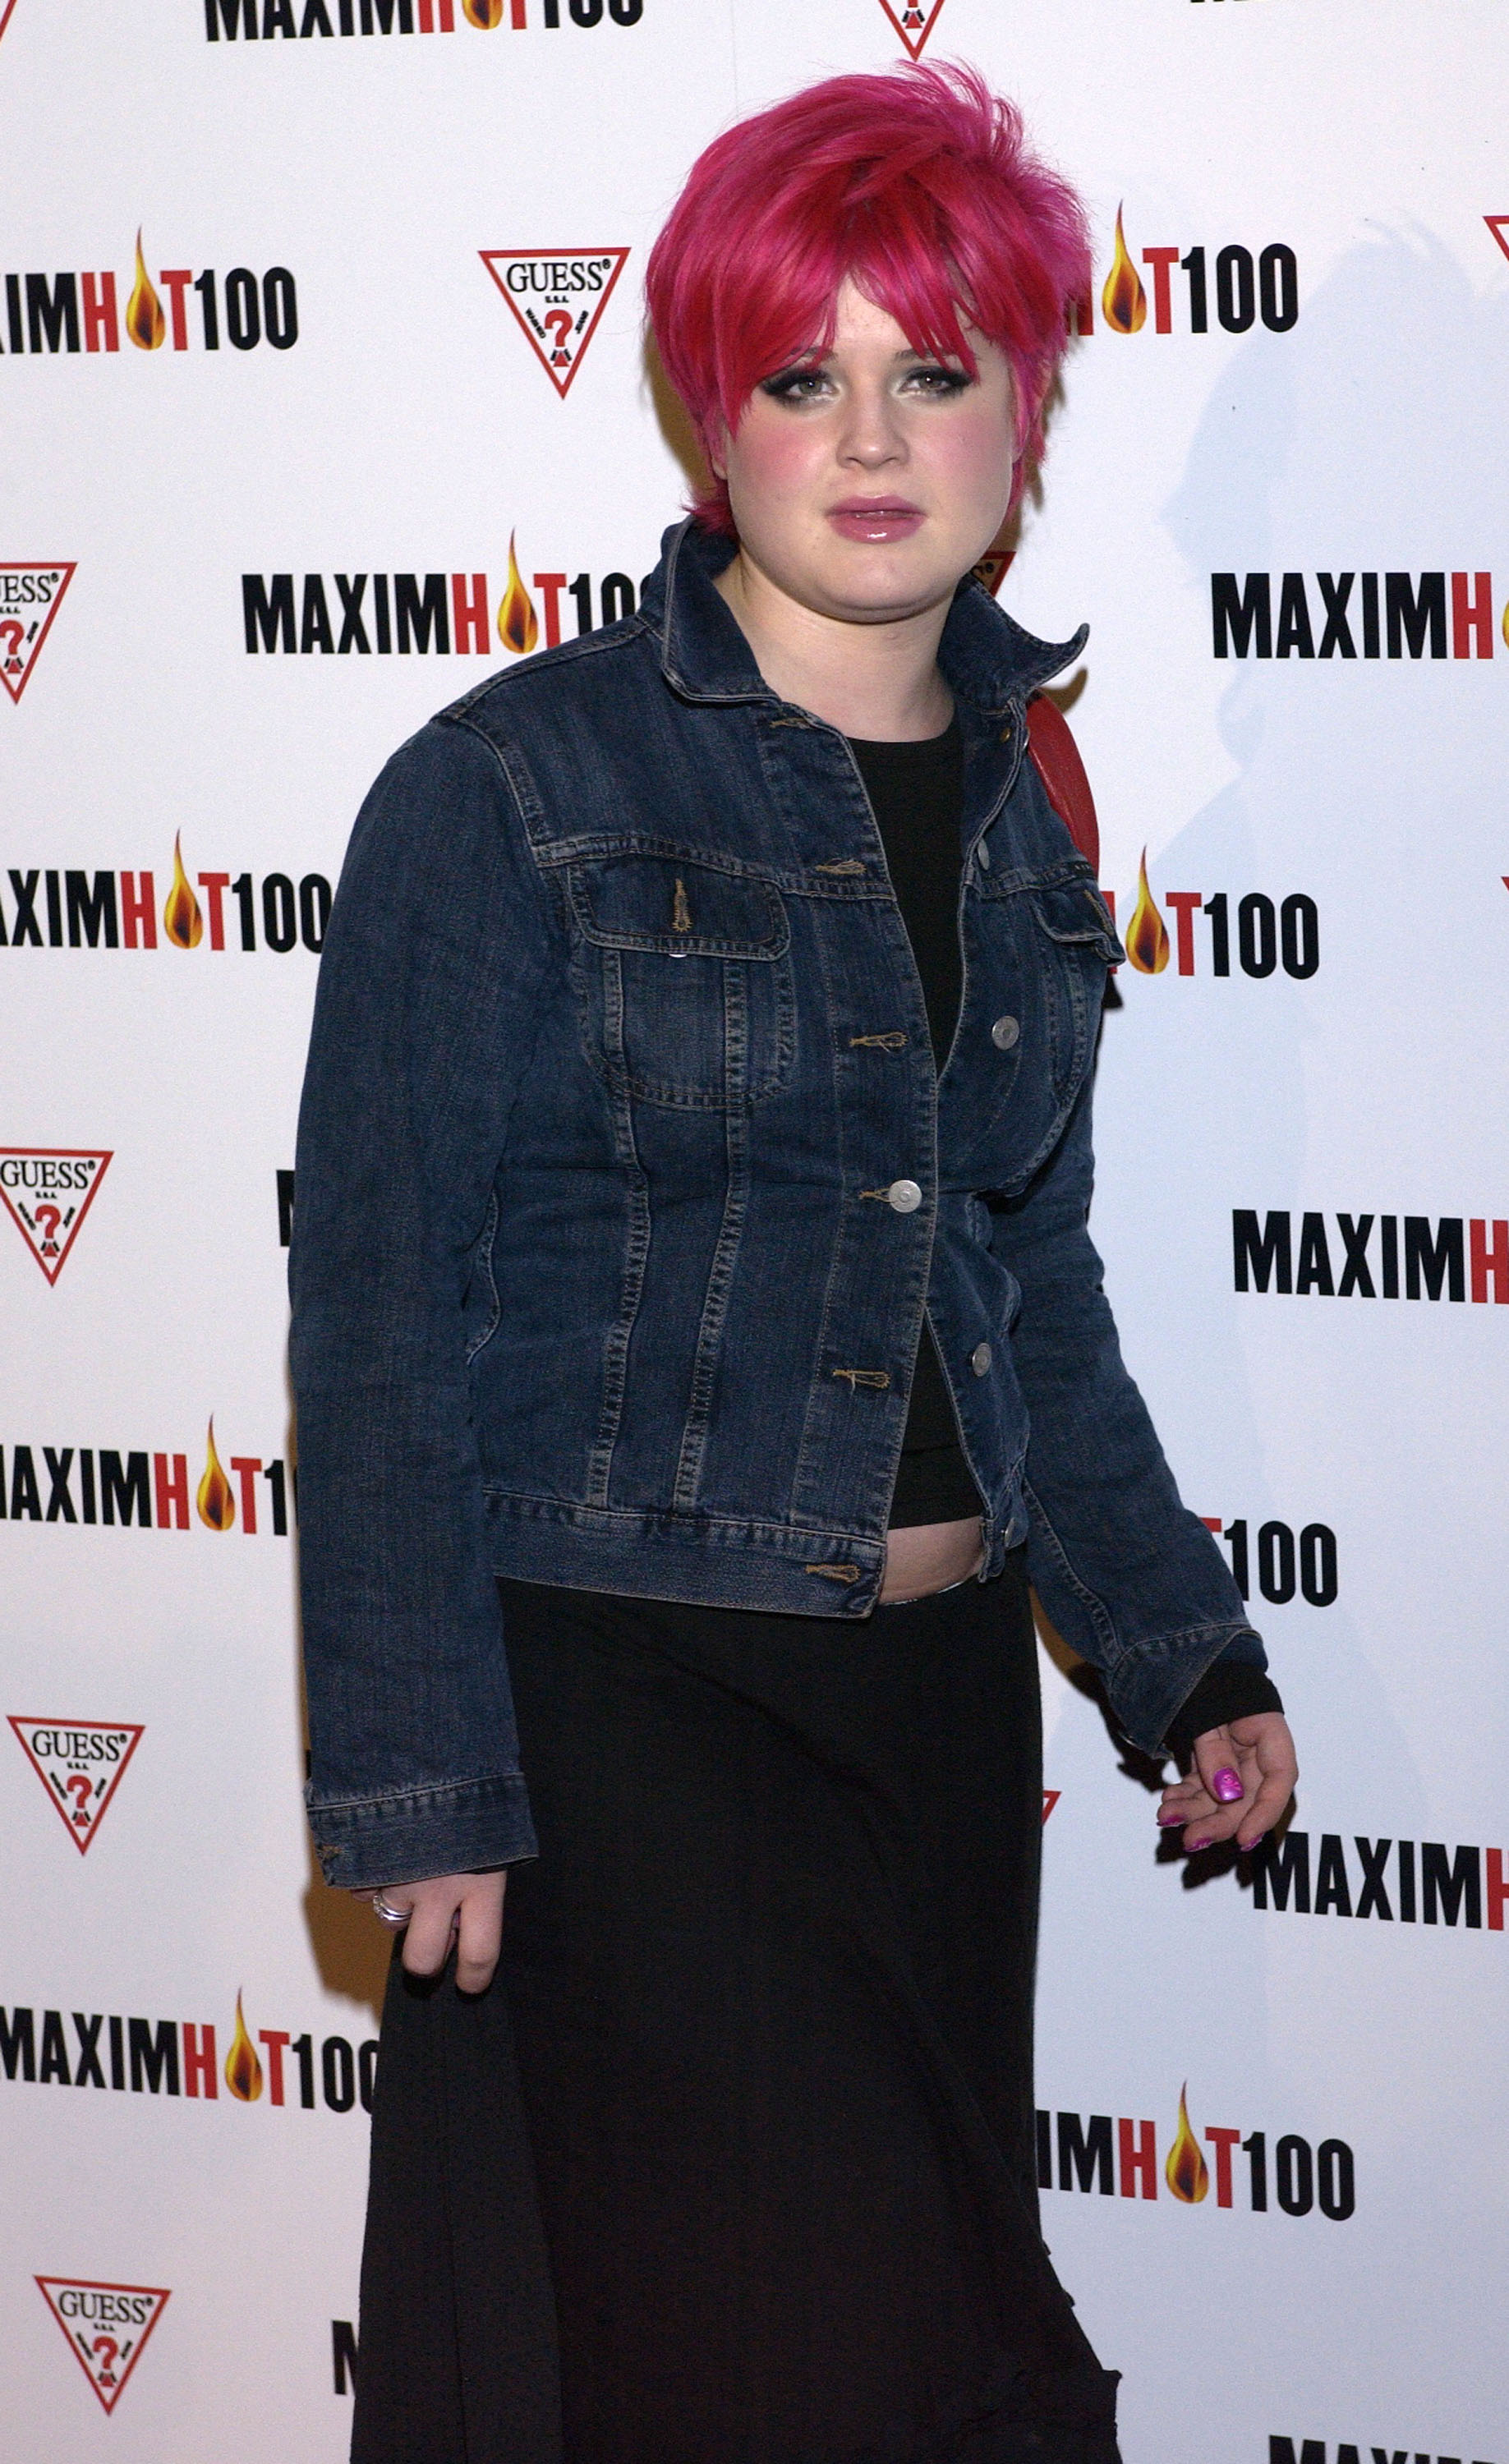 Kelly Osbourne at the Maxim Hot 100 Party in Hollywood, California in 2002 | Source: Getty Images